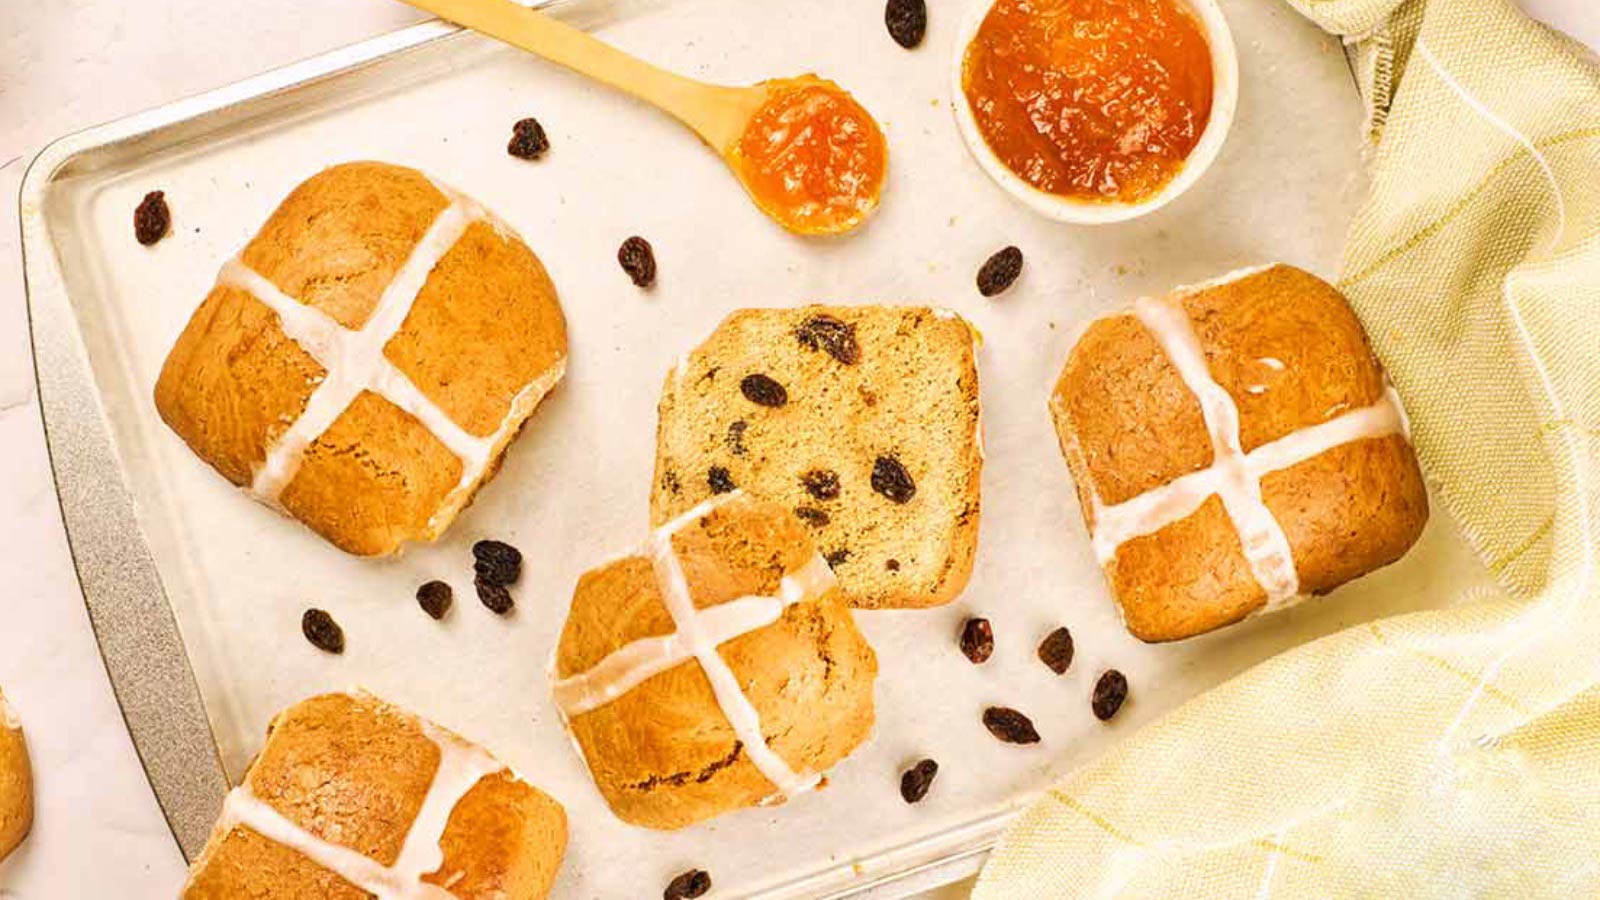 An overhead view of hot cross buns on a baking pan with raisins strewn around them and a bowl of jam sits to the side.